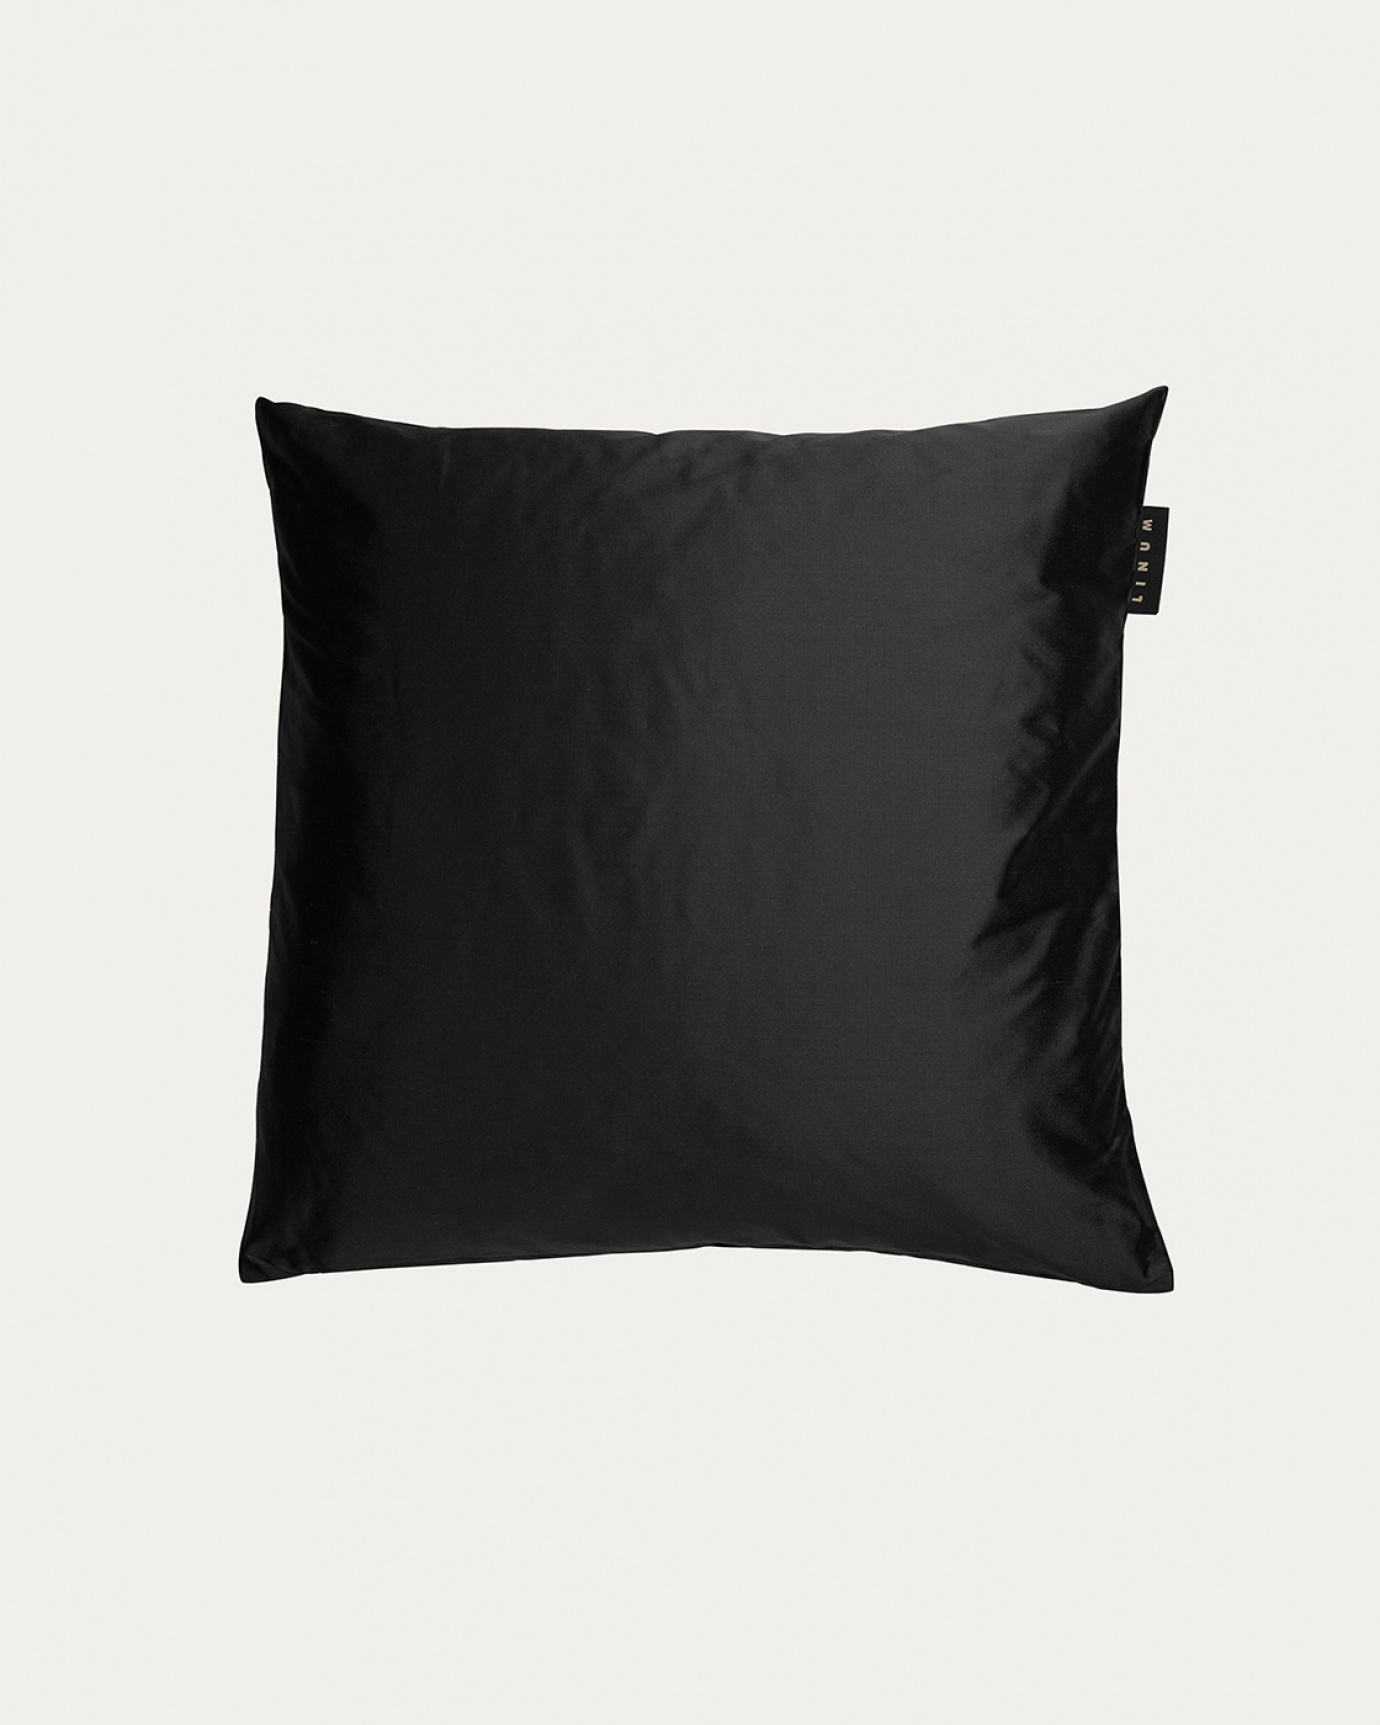 Product image black SILK cushion cover made of 100% dupion silk that gives a nice lustre from LINUM DESIGN. Size 40x40 cm.